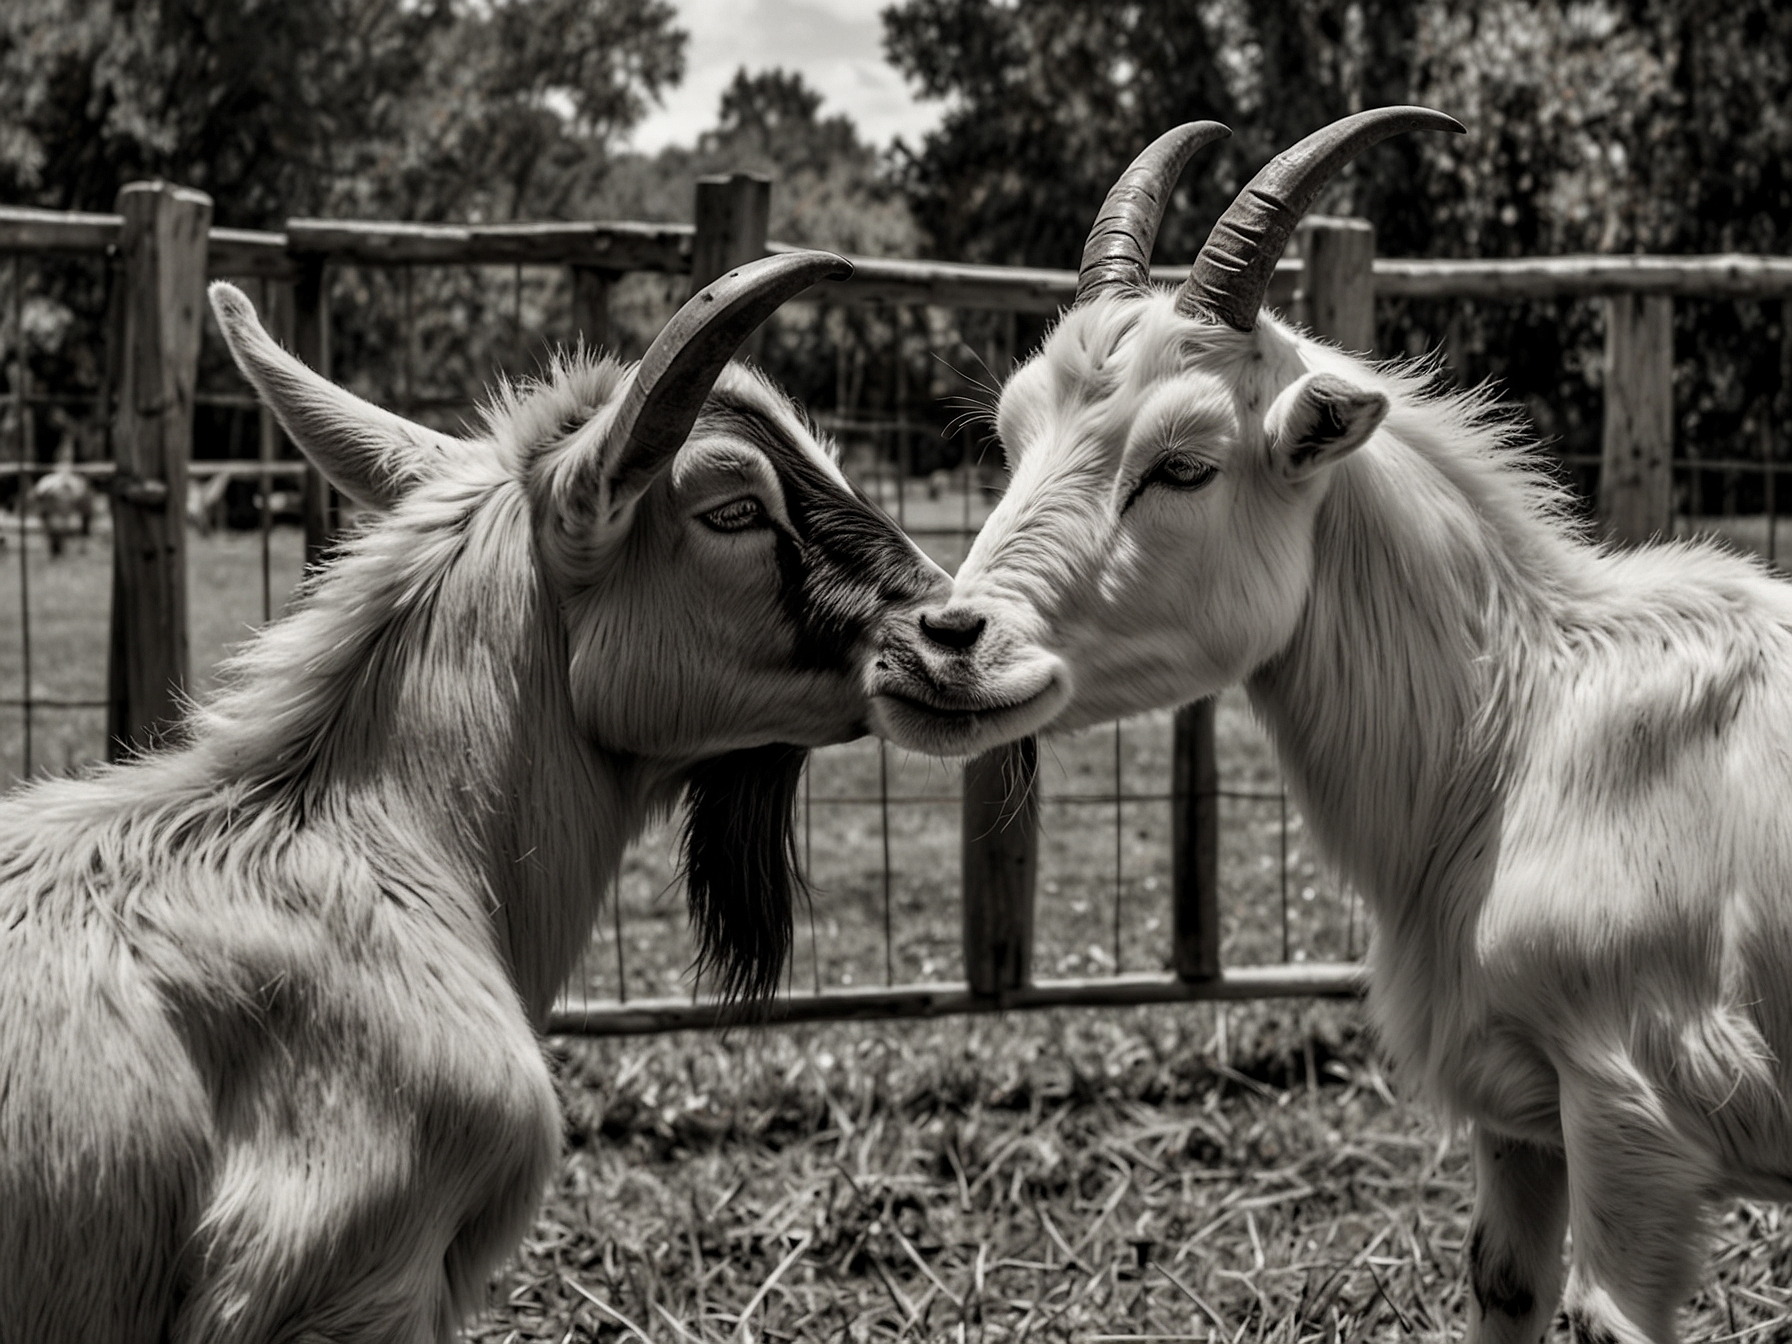 Two playful goats butt heads during a Picnic with Goats event at the Cajun Corral Farm in Pearl River, providing family-friendly entertainment.